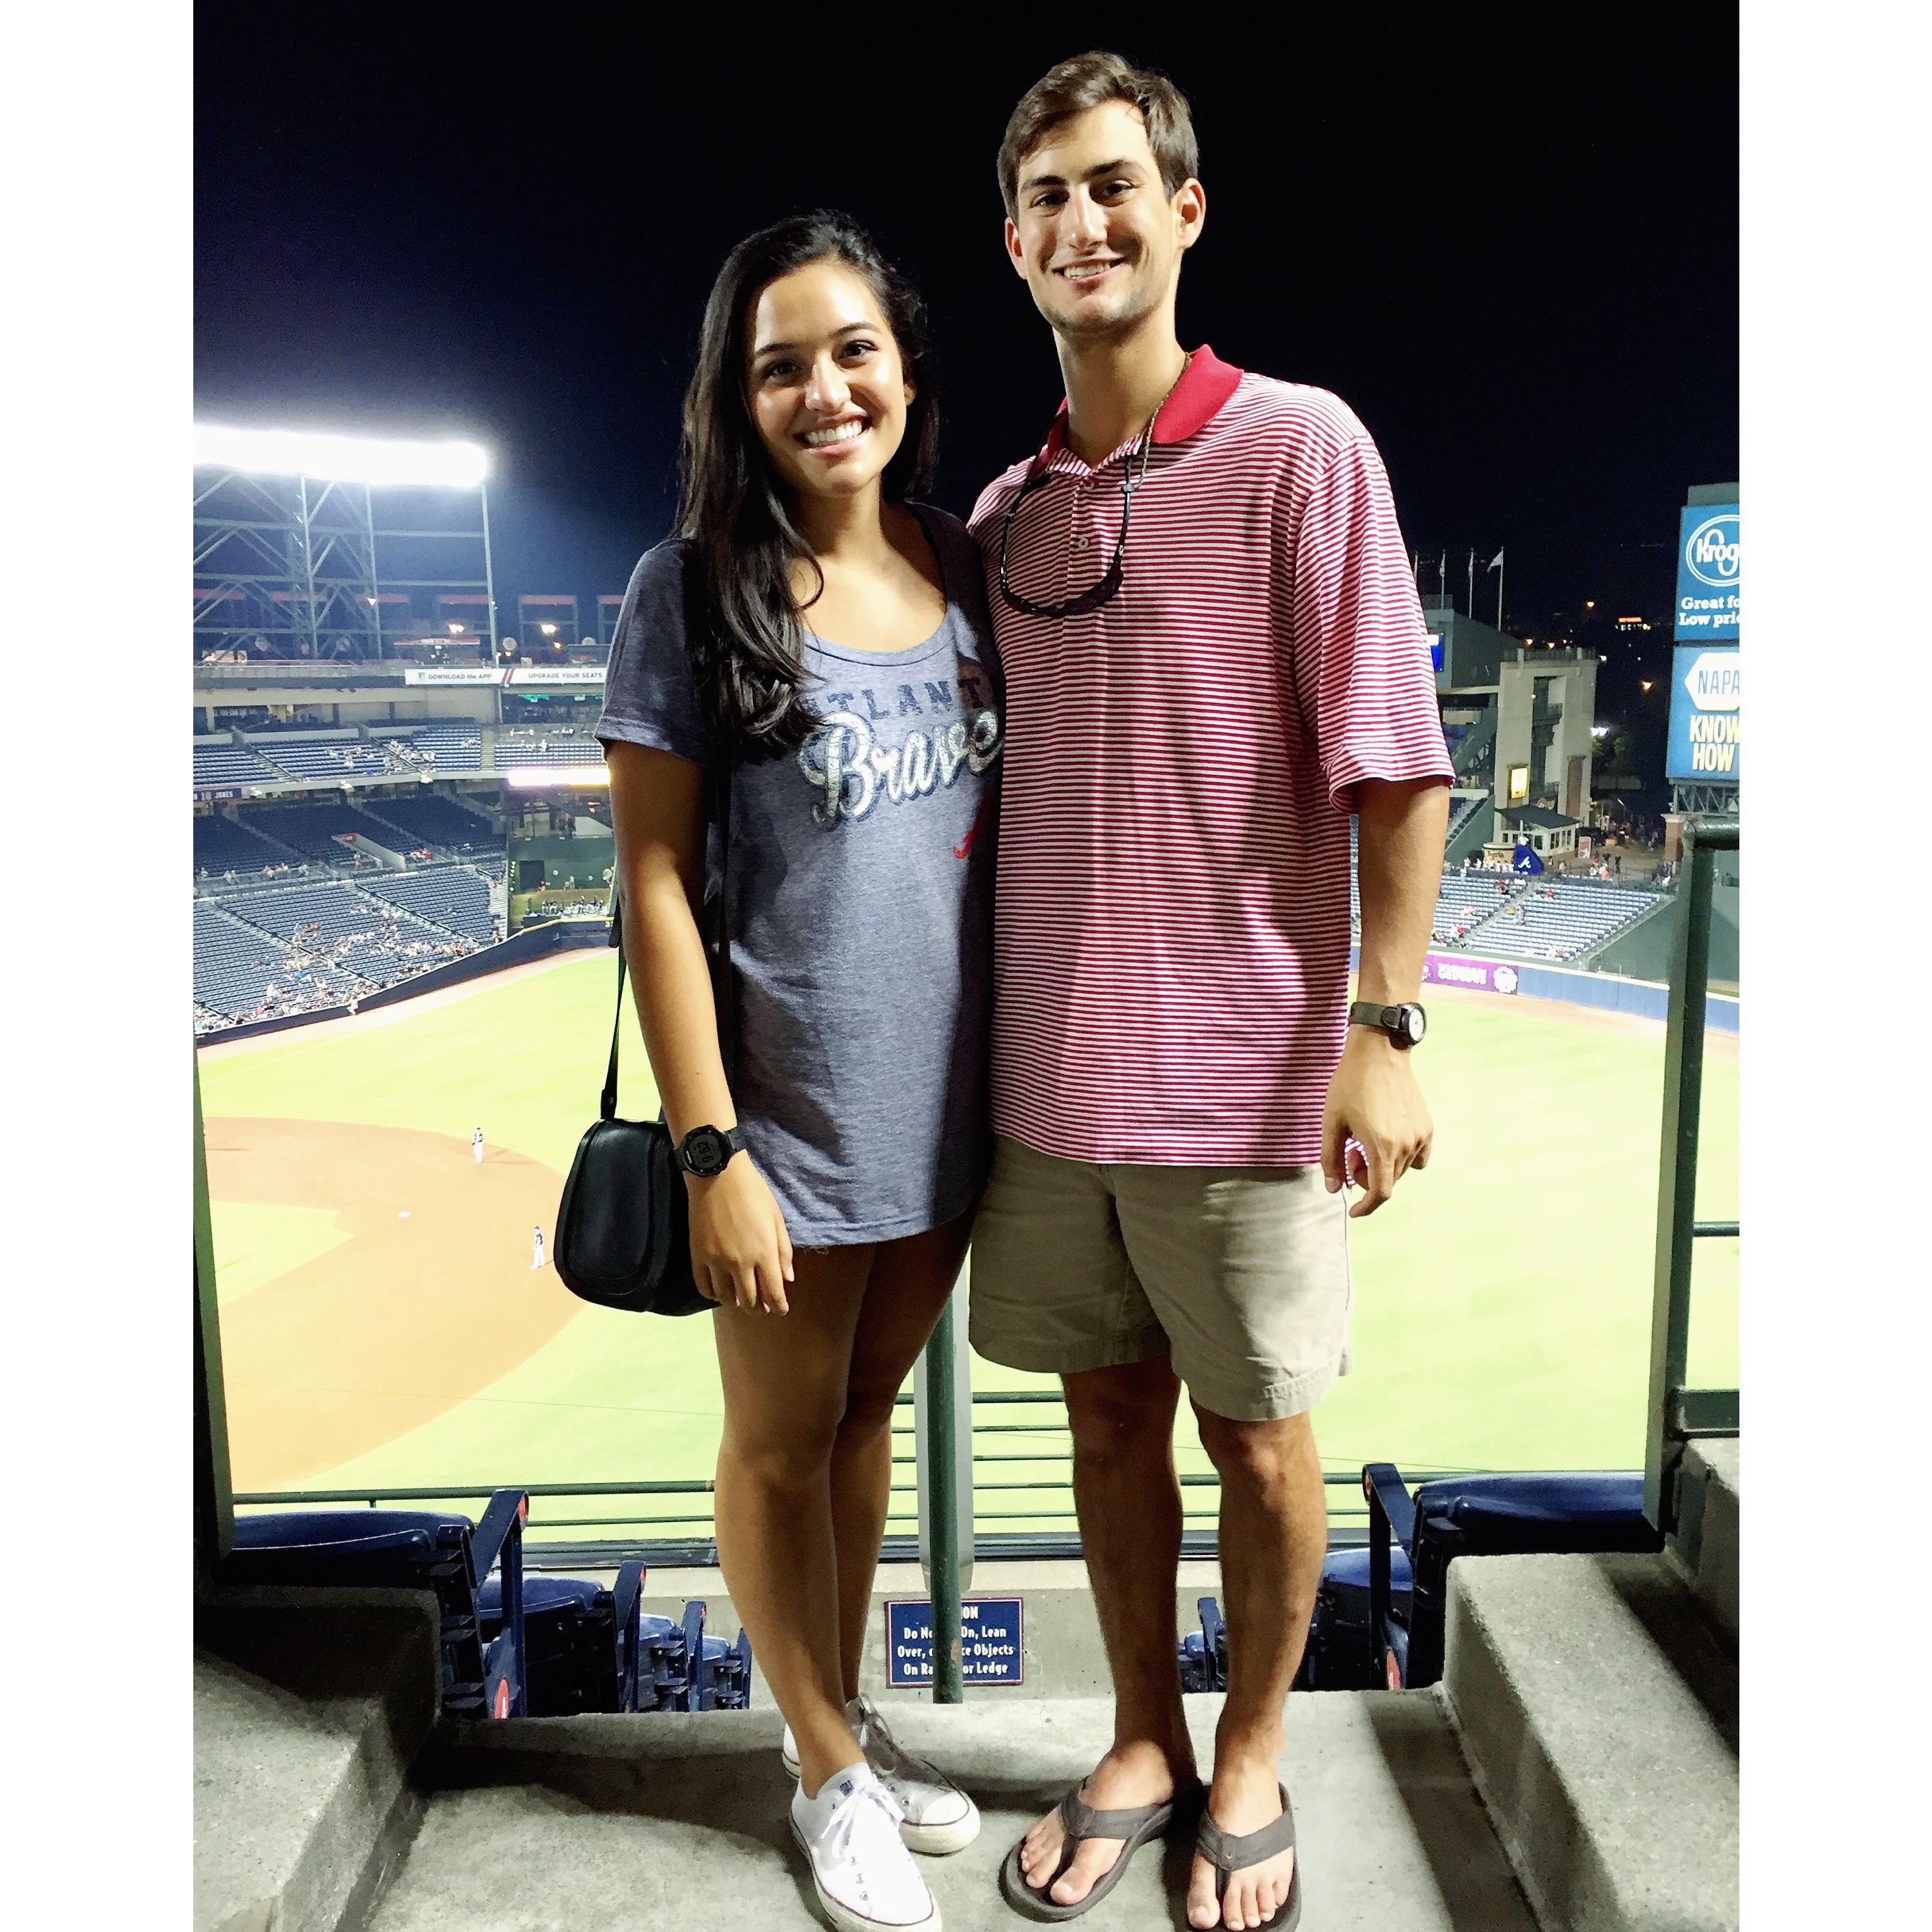 braves date night - savannah & will both agree baseball is not for them